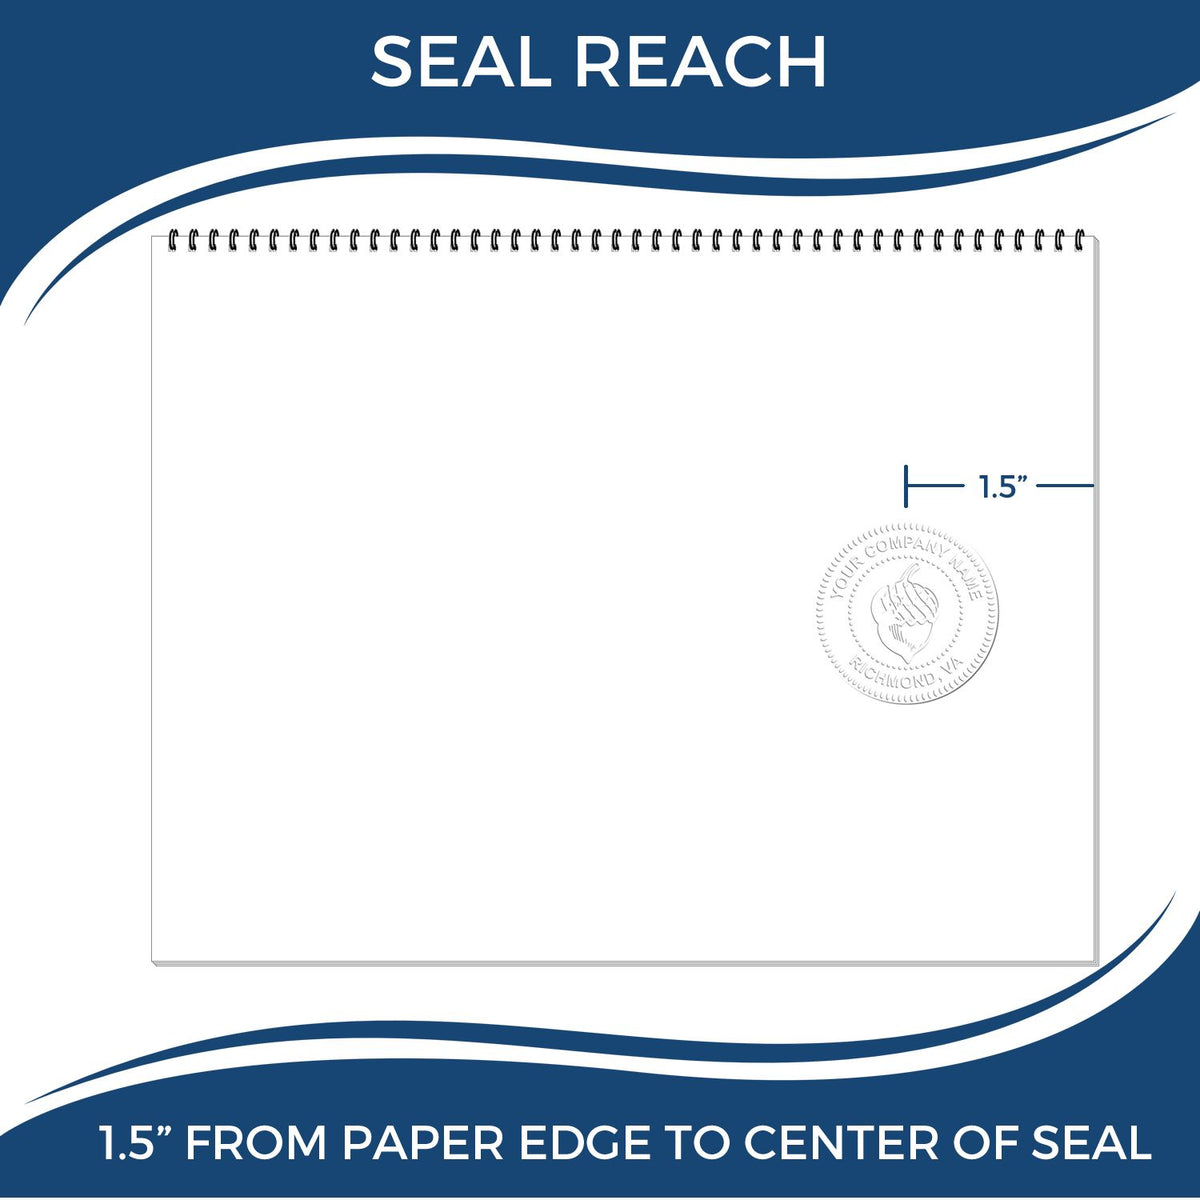 An infographic showing the seal reach which is represented by a ruler and a miniature seal image of the Soft Tennessee Professional Geologist Seal